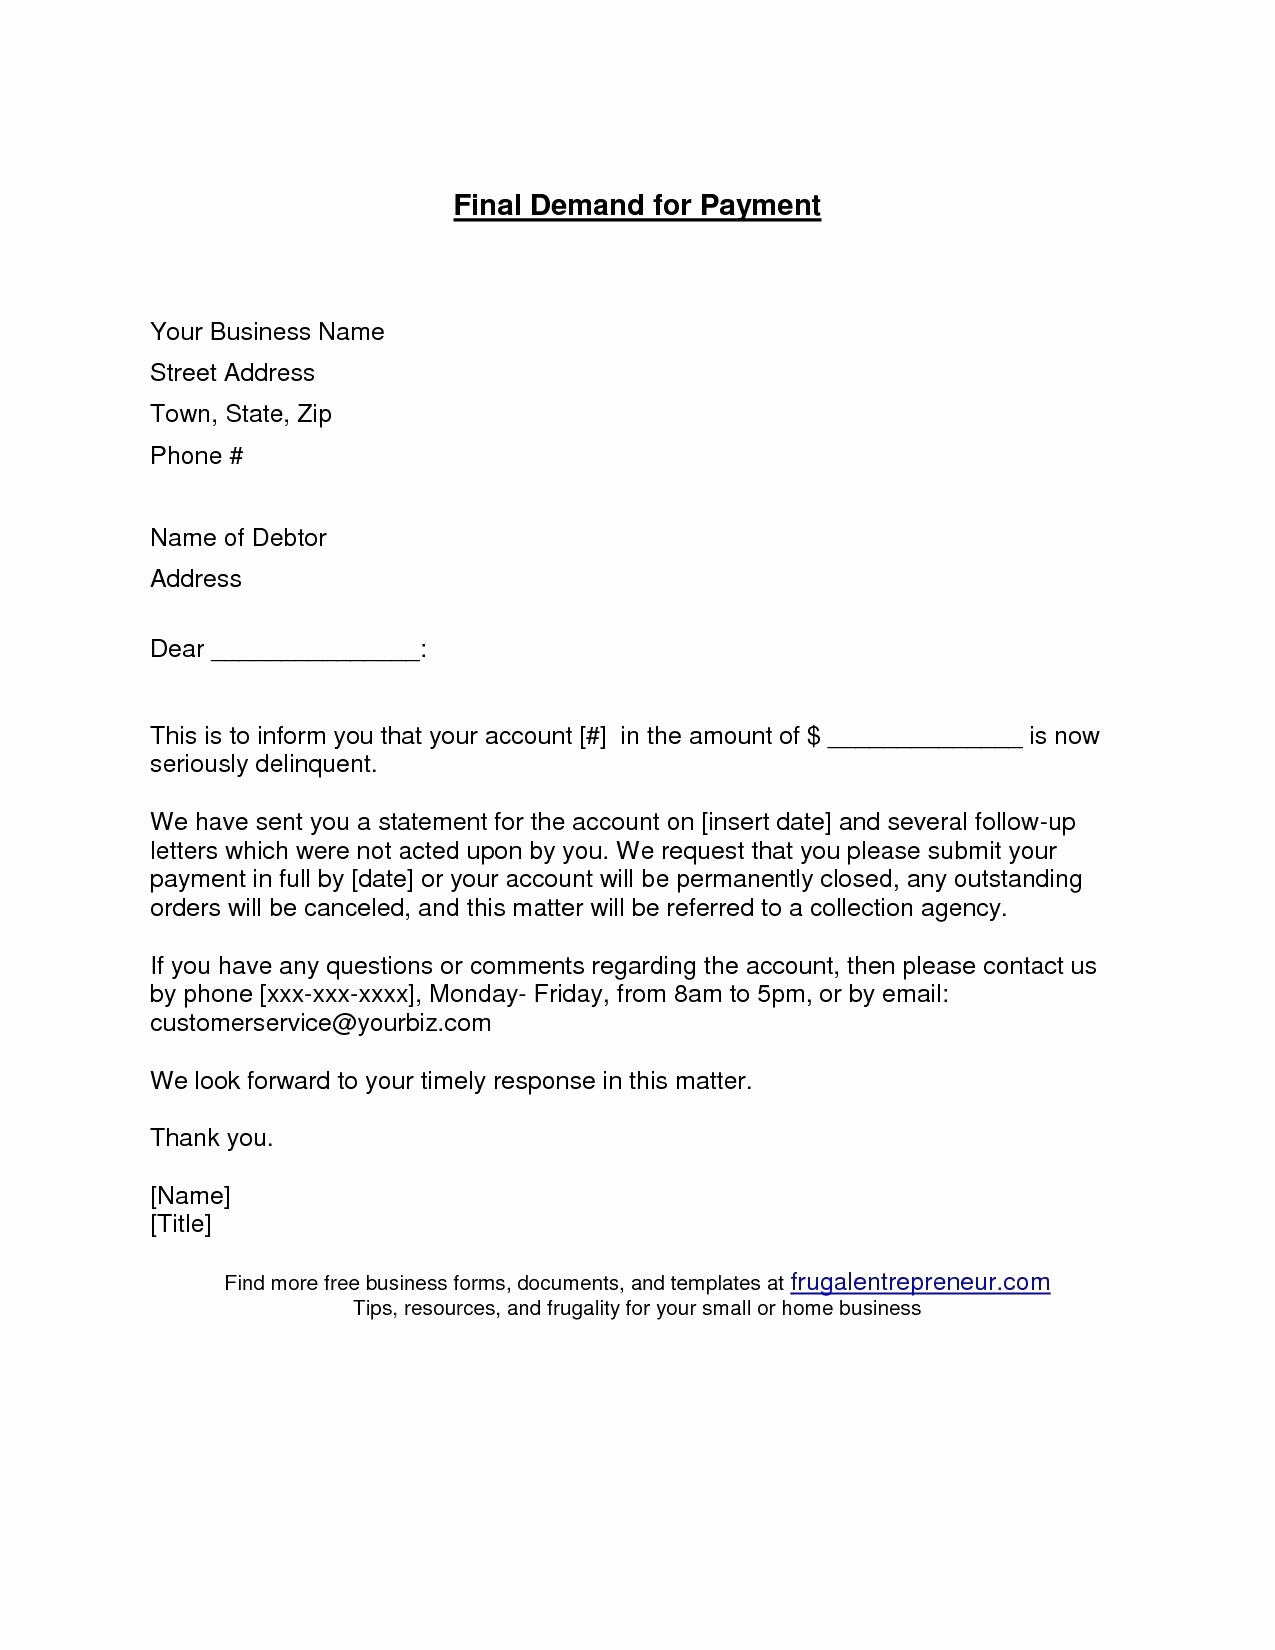 Sample Demand Letter for Payment Beautiful Final Demand for Payment Letter Template Examples